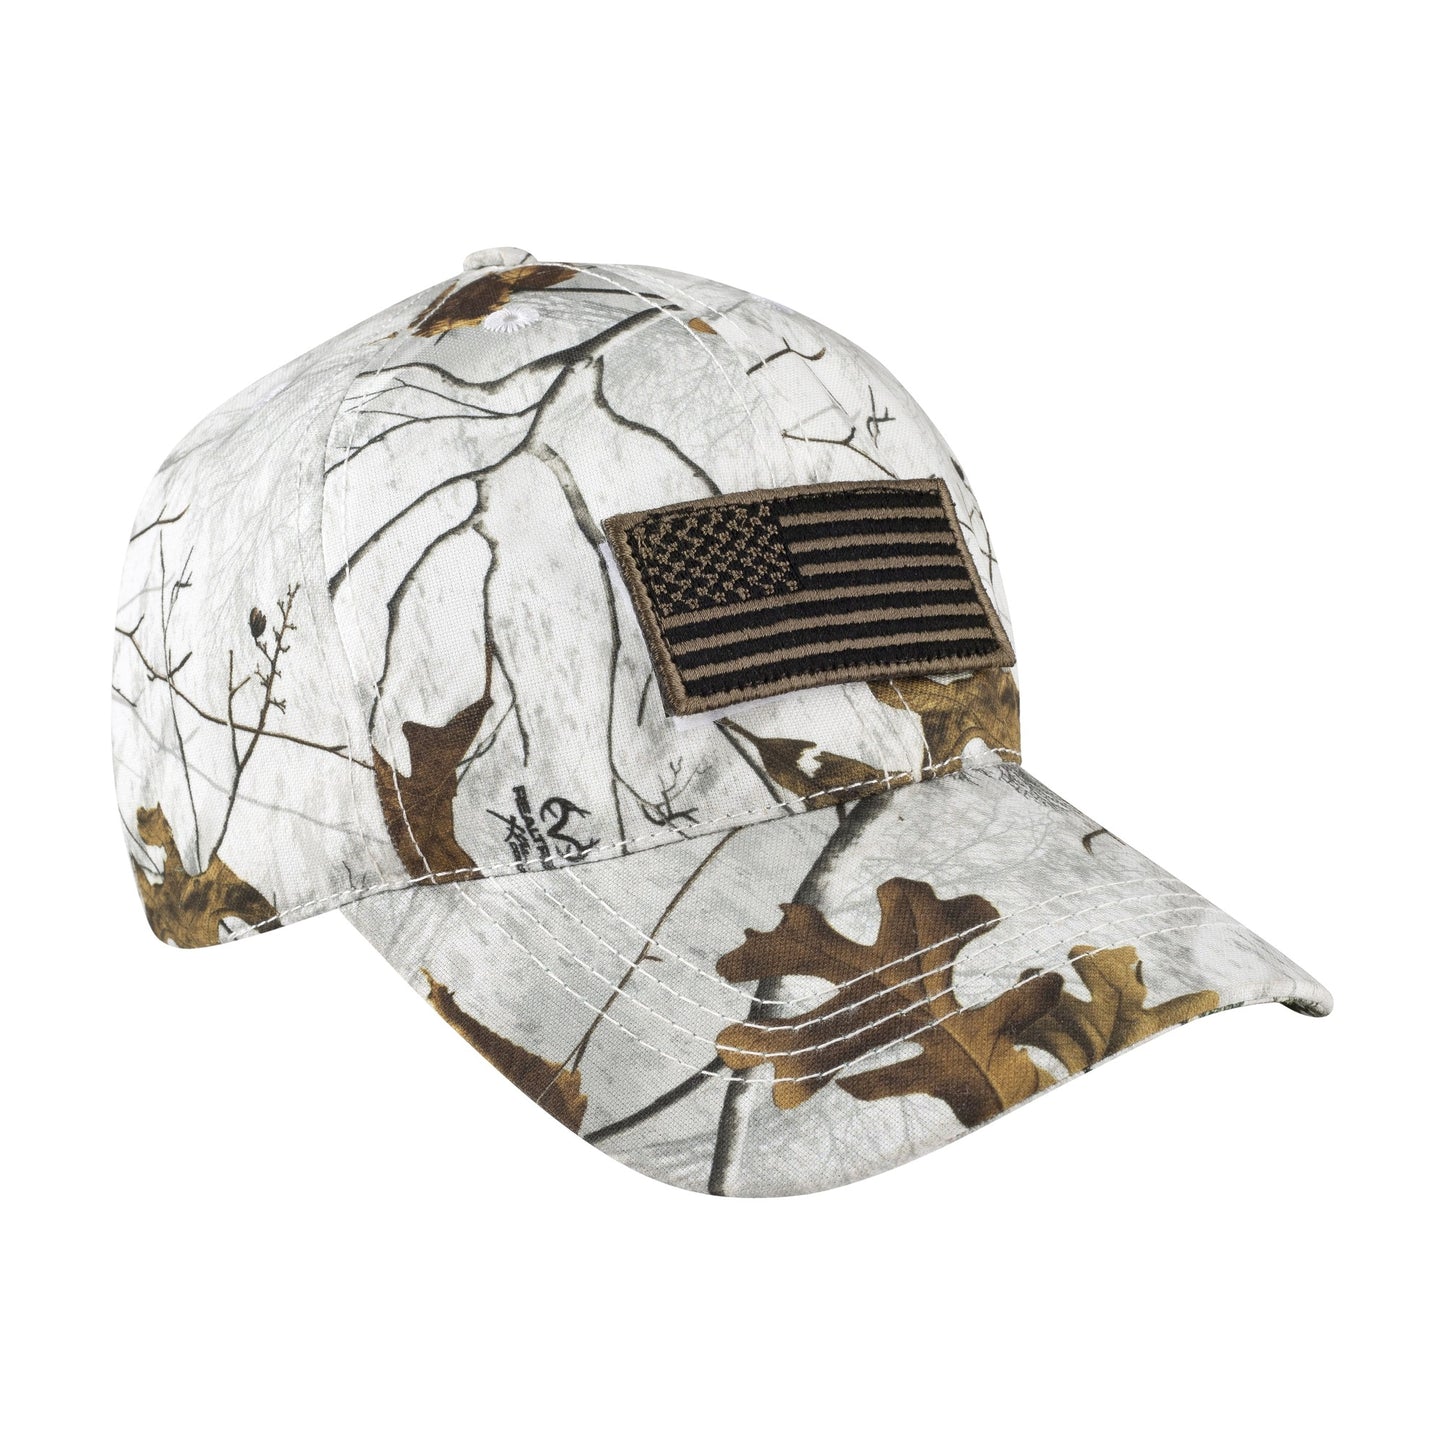 Youth Baseball Cap with Embroidered Antlers Logo